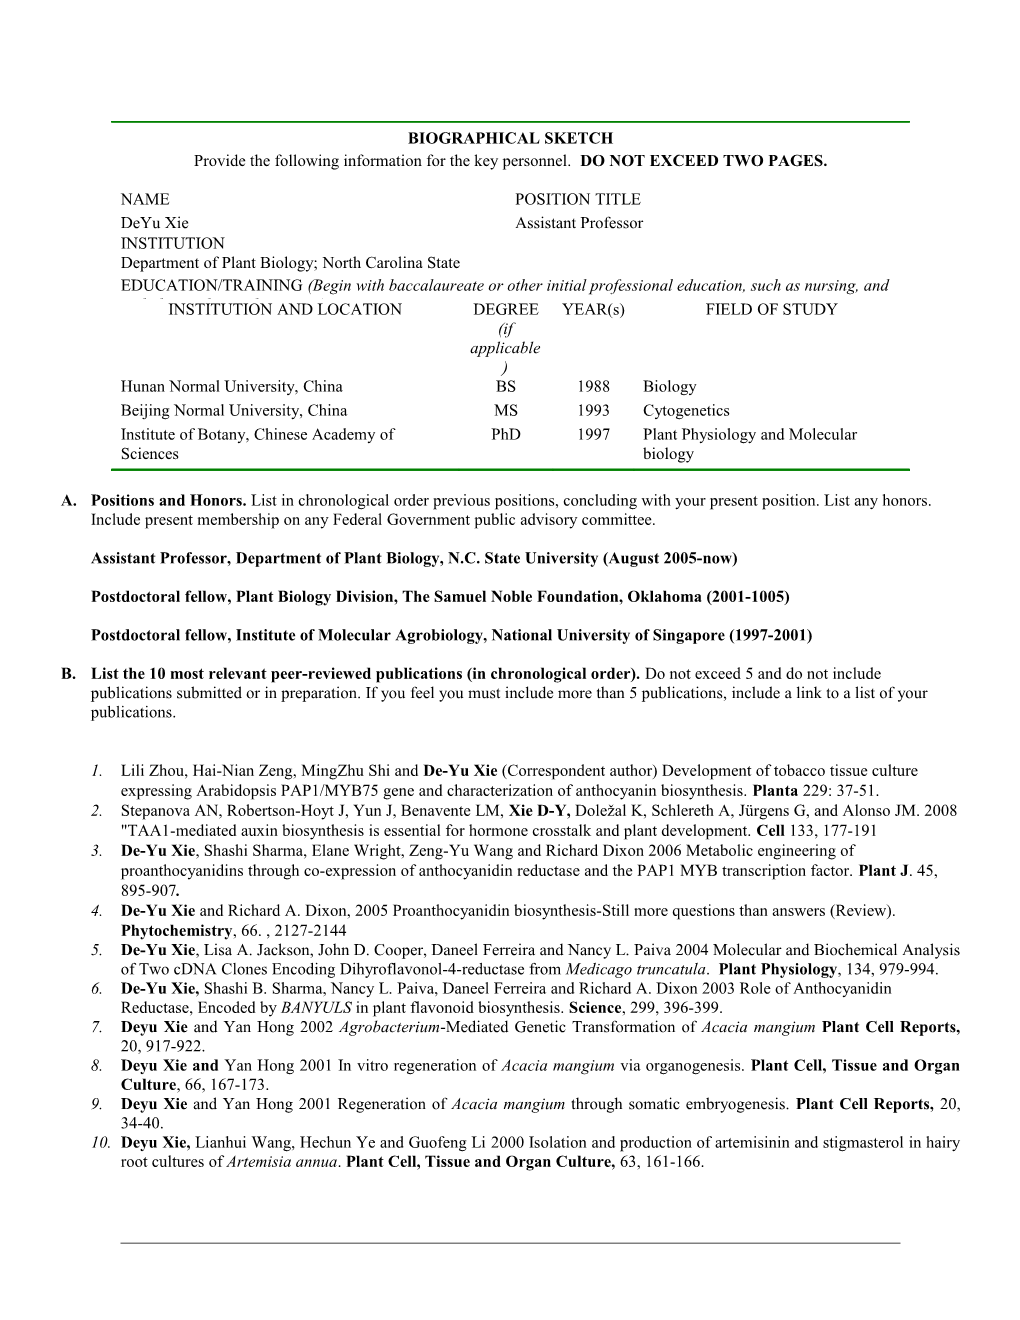 PHS 398/2590 (Rev. 09/04, Reissued 4/2006)Page 1 Biographical Sketch Format Page